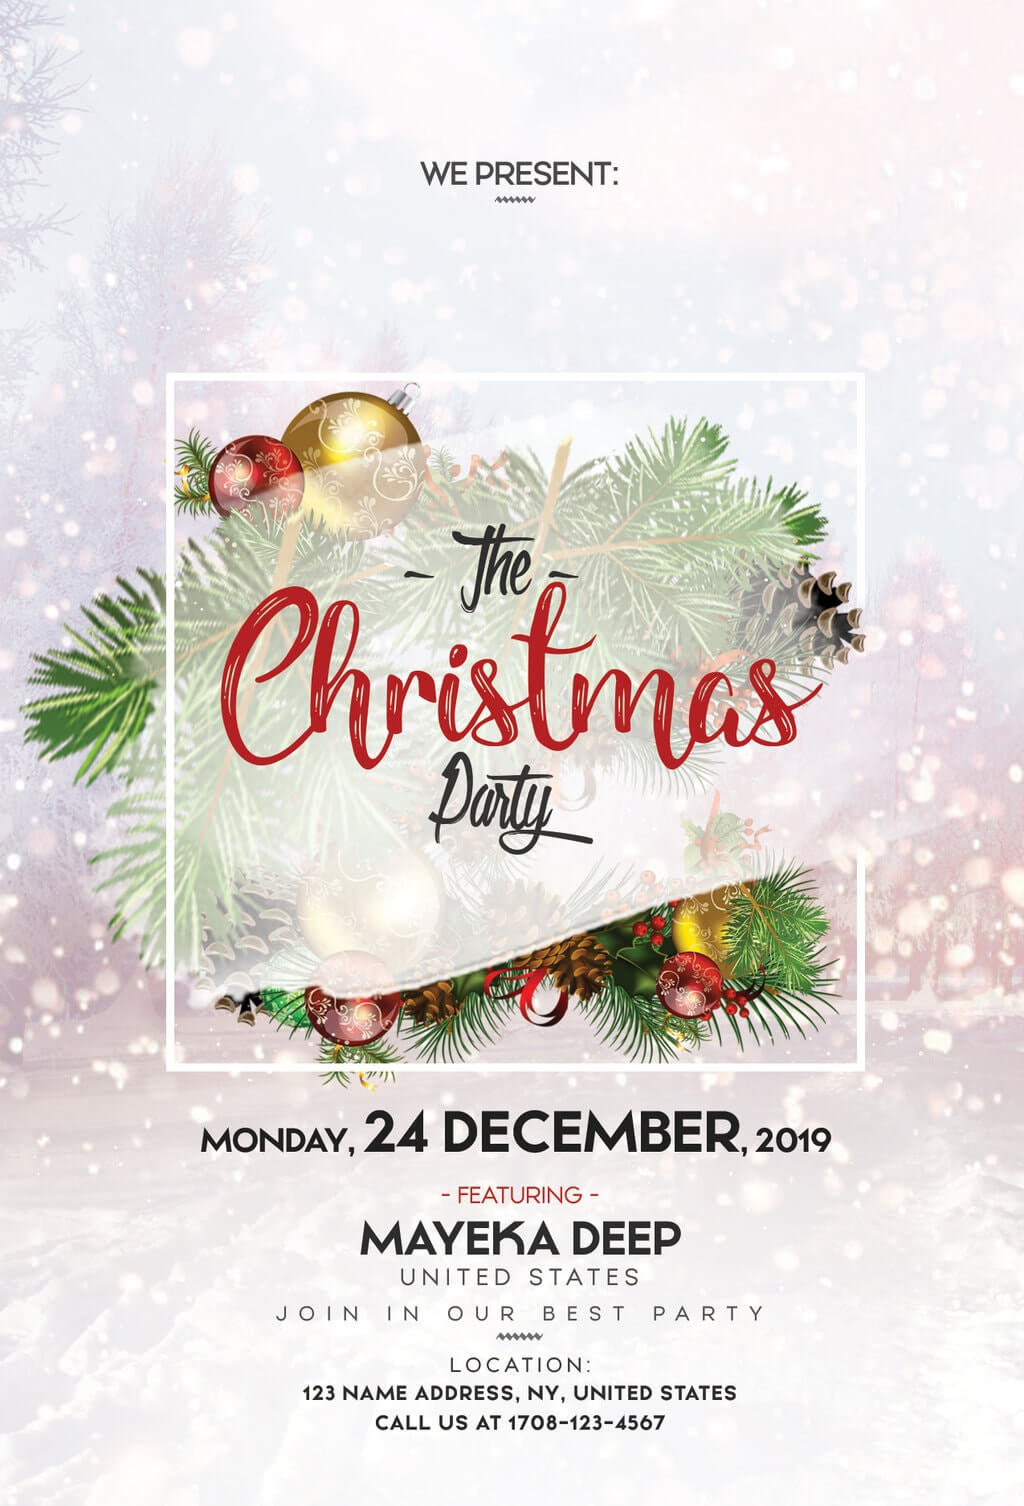 Merry Christmas Free Psd Flyer Template | Freebiedesign Throughout Christmas Brochure Templates Free